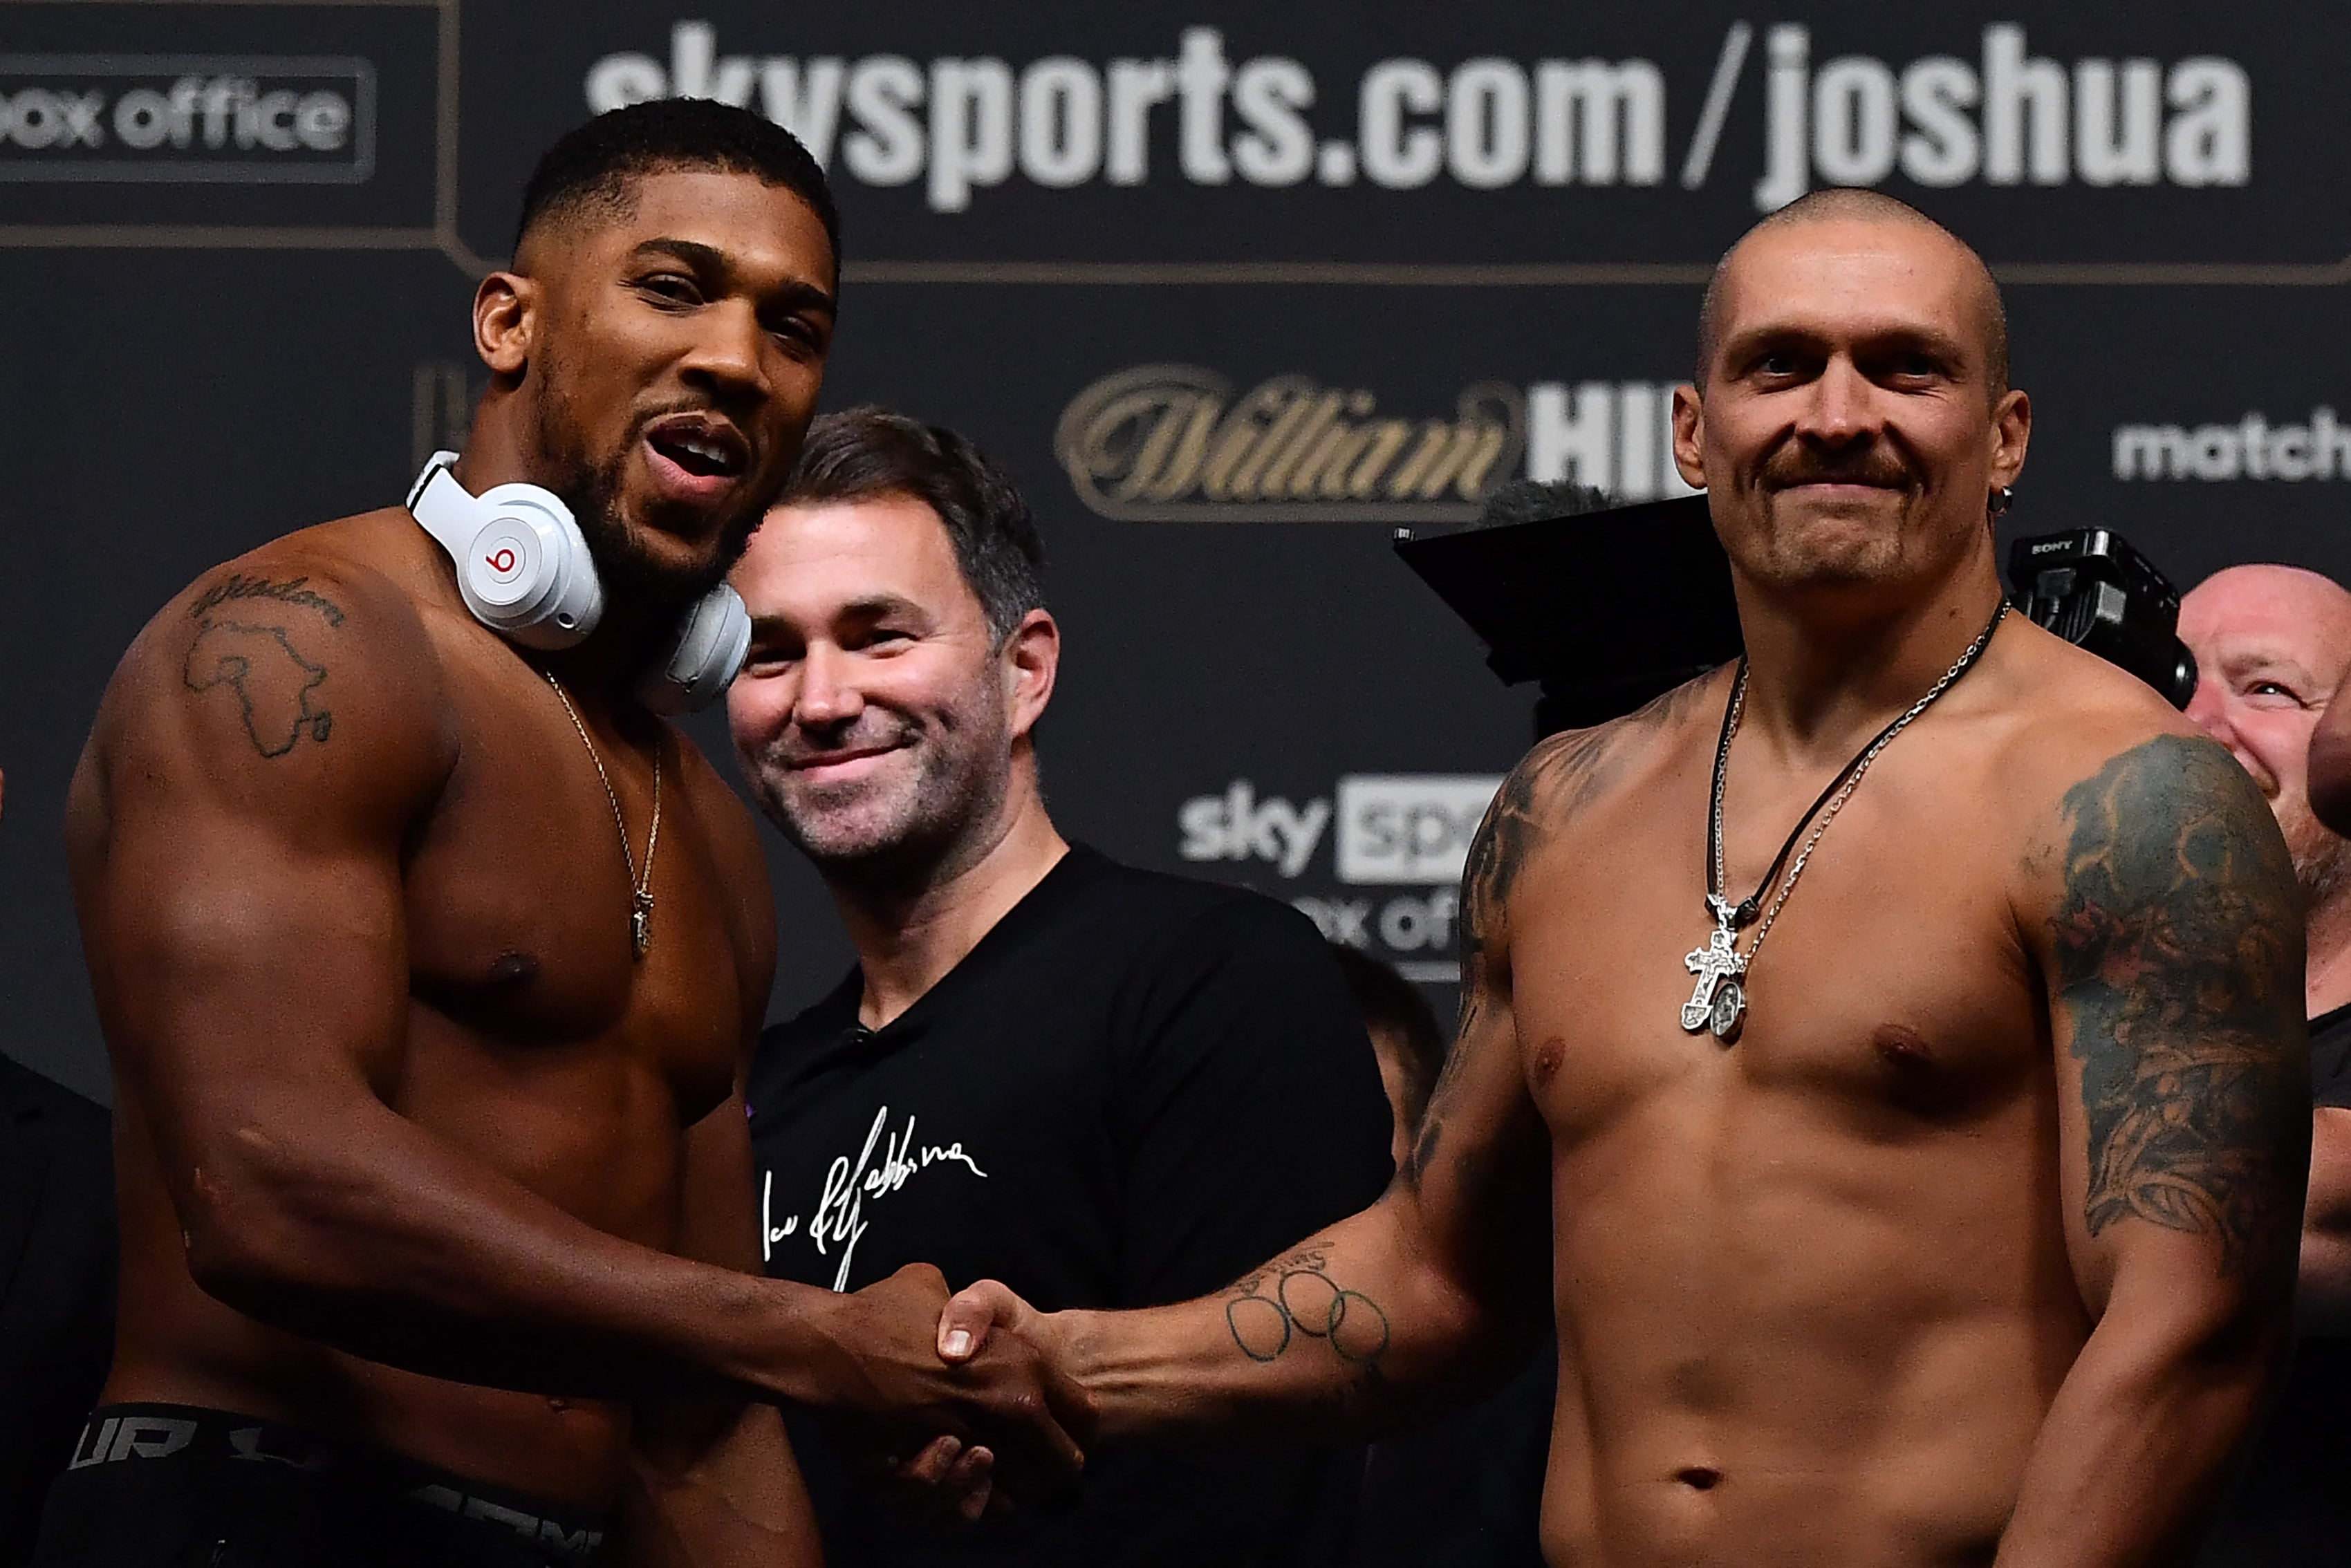 Joshua vs Usyk Briton weighs-in at more than a stone heavier than Ukrainian ahead of heavyweight title fight The Independent